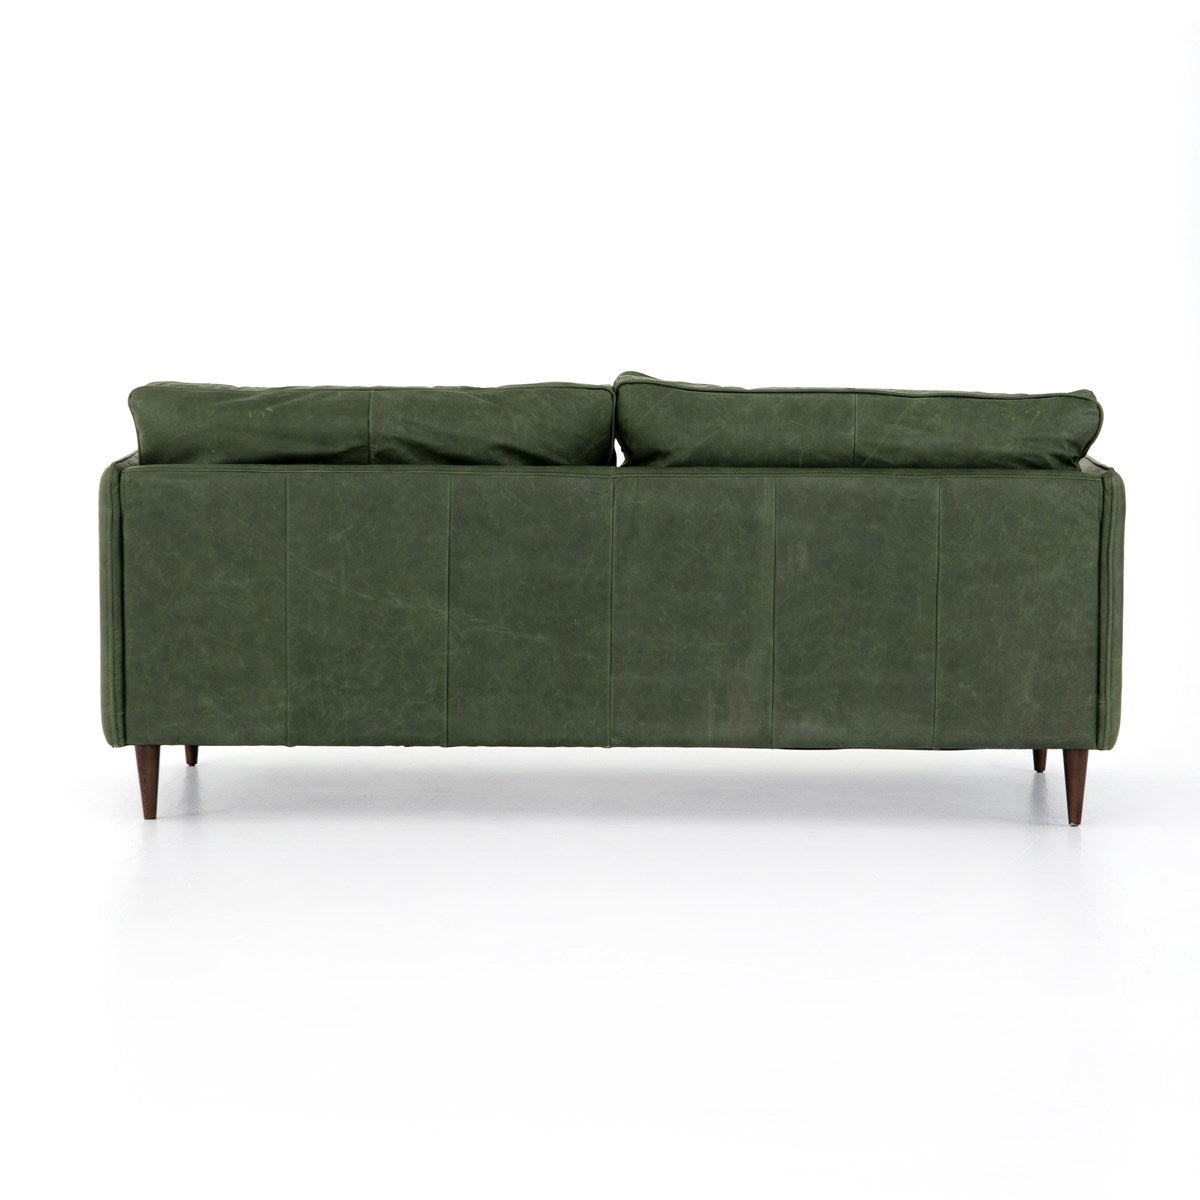 Load image into Gallery viewer, Reese Sofa Sofa Four Hands     Four Hands, Burke Decor, Mid Century Modern Furniture, Old Bones Furniture Company, Old Bones Co, Modern Mid Century, Designer Furniture, https://www.oldbonesco.com/
